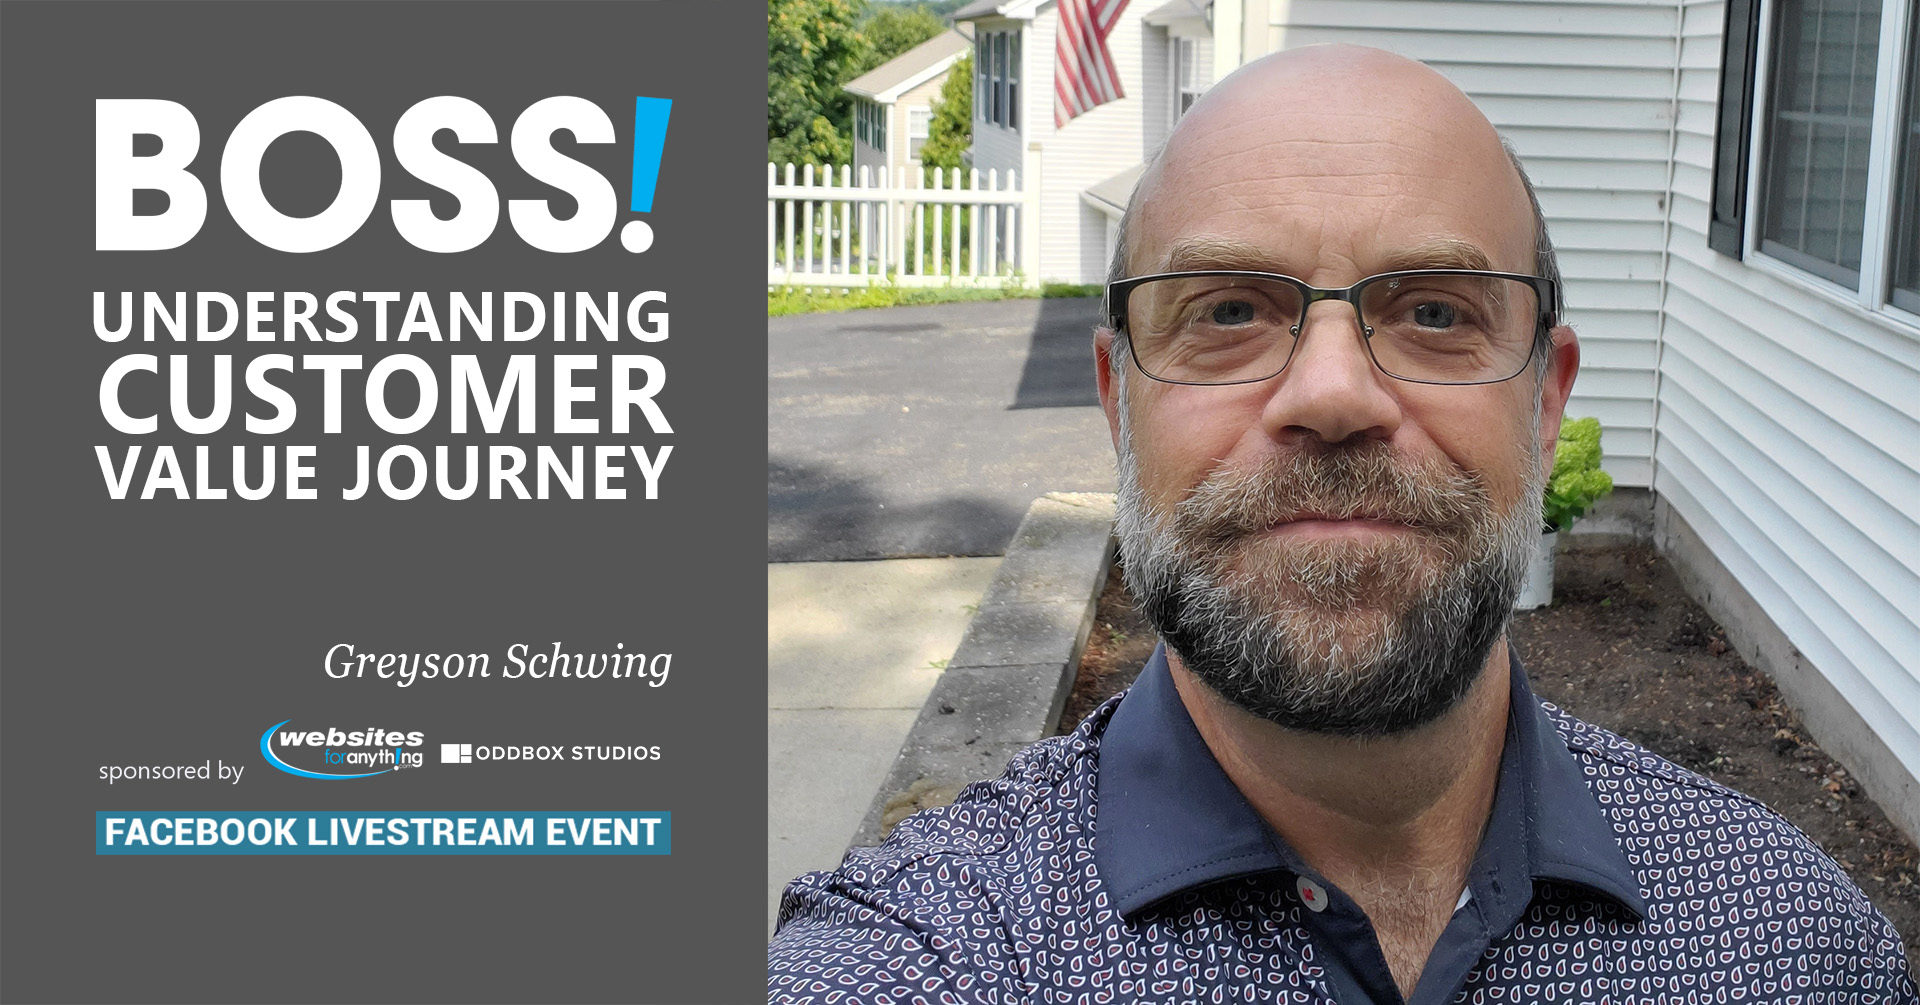 Understanding Customer Value Journey with Greyson Schwing at BOSS on August 4th 2020